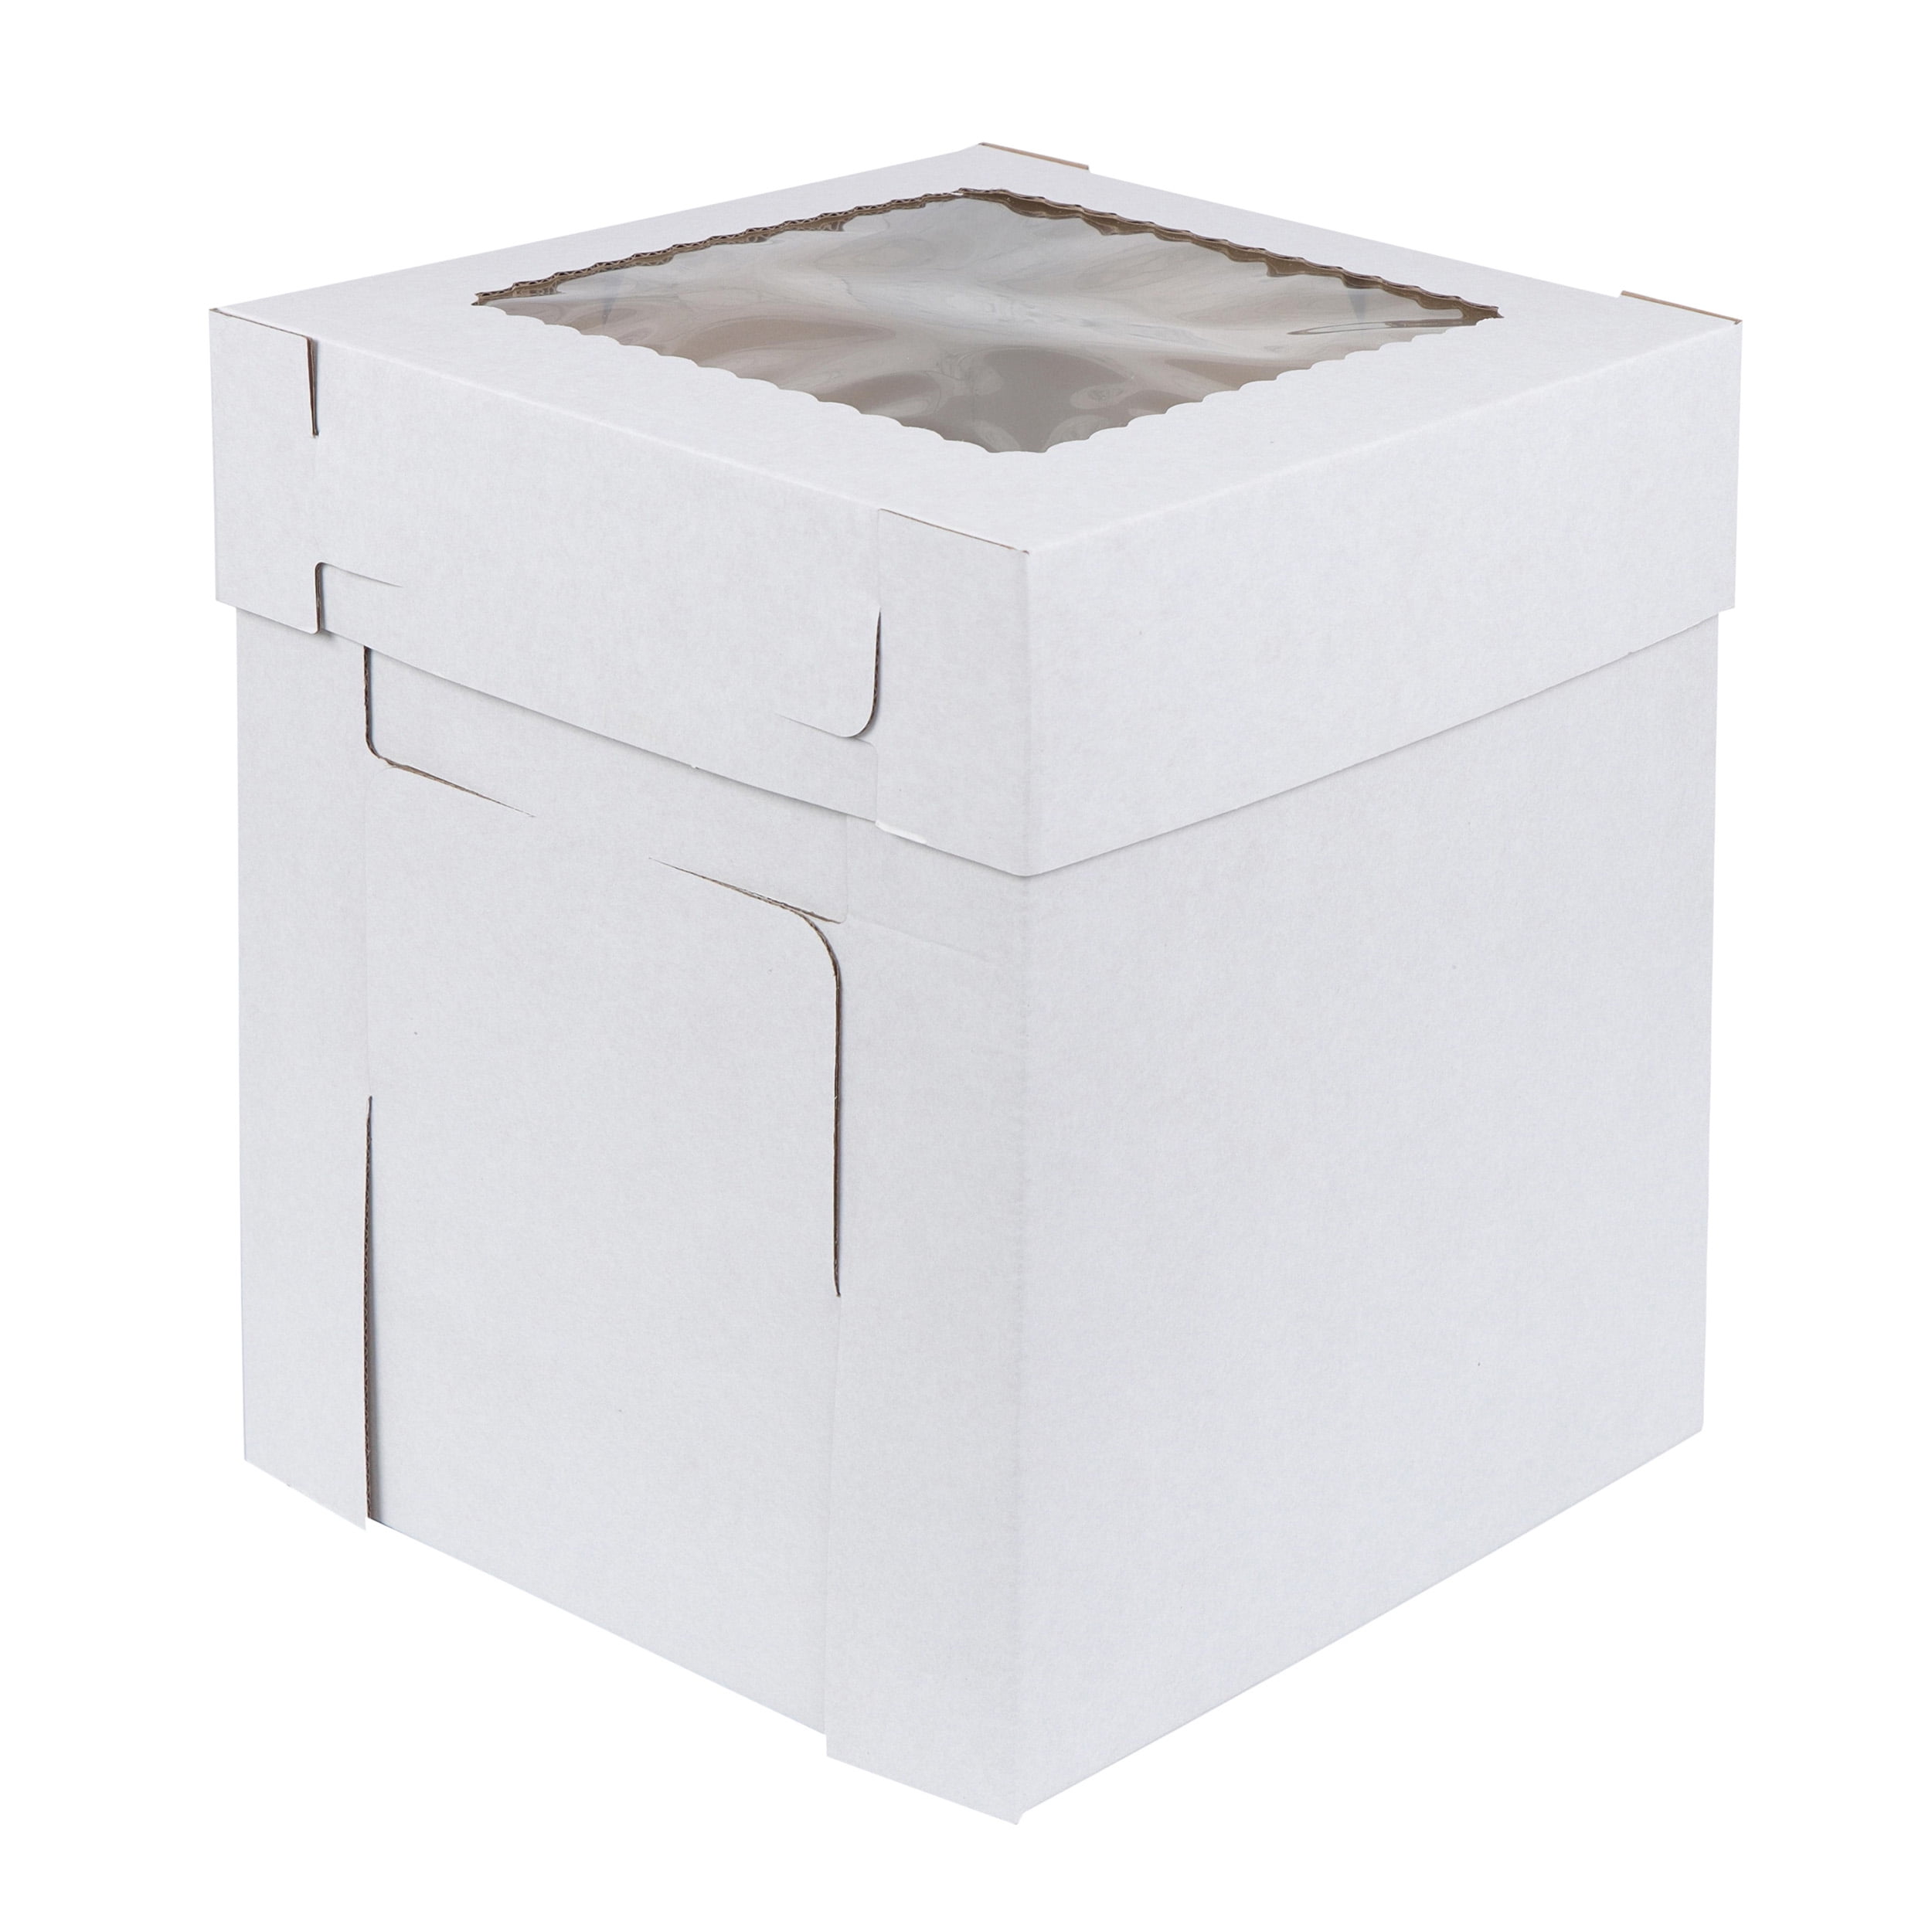 Bakery Display Box 15 Count 16 x 12 inch White Cake Box with Window 